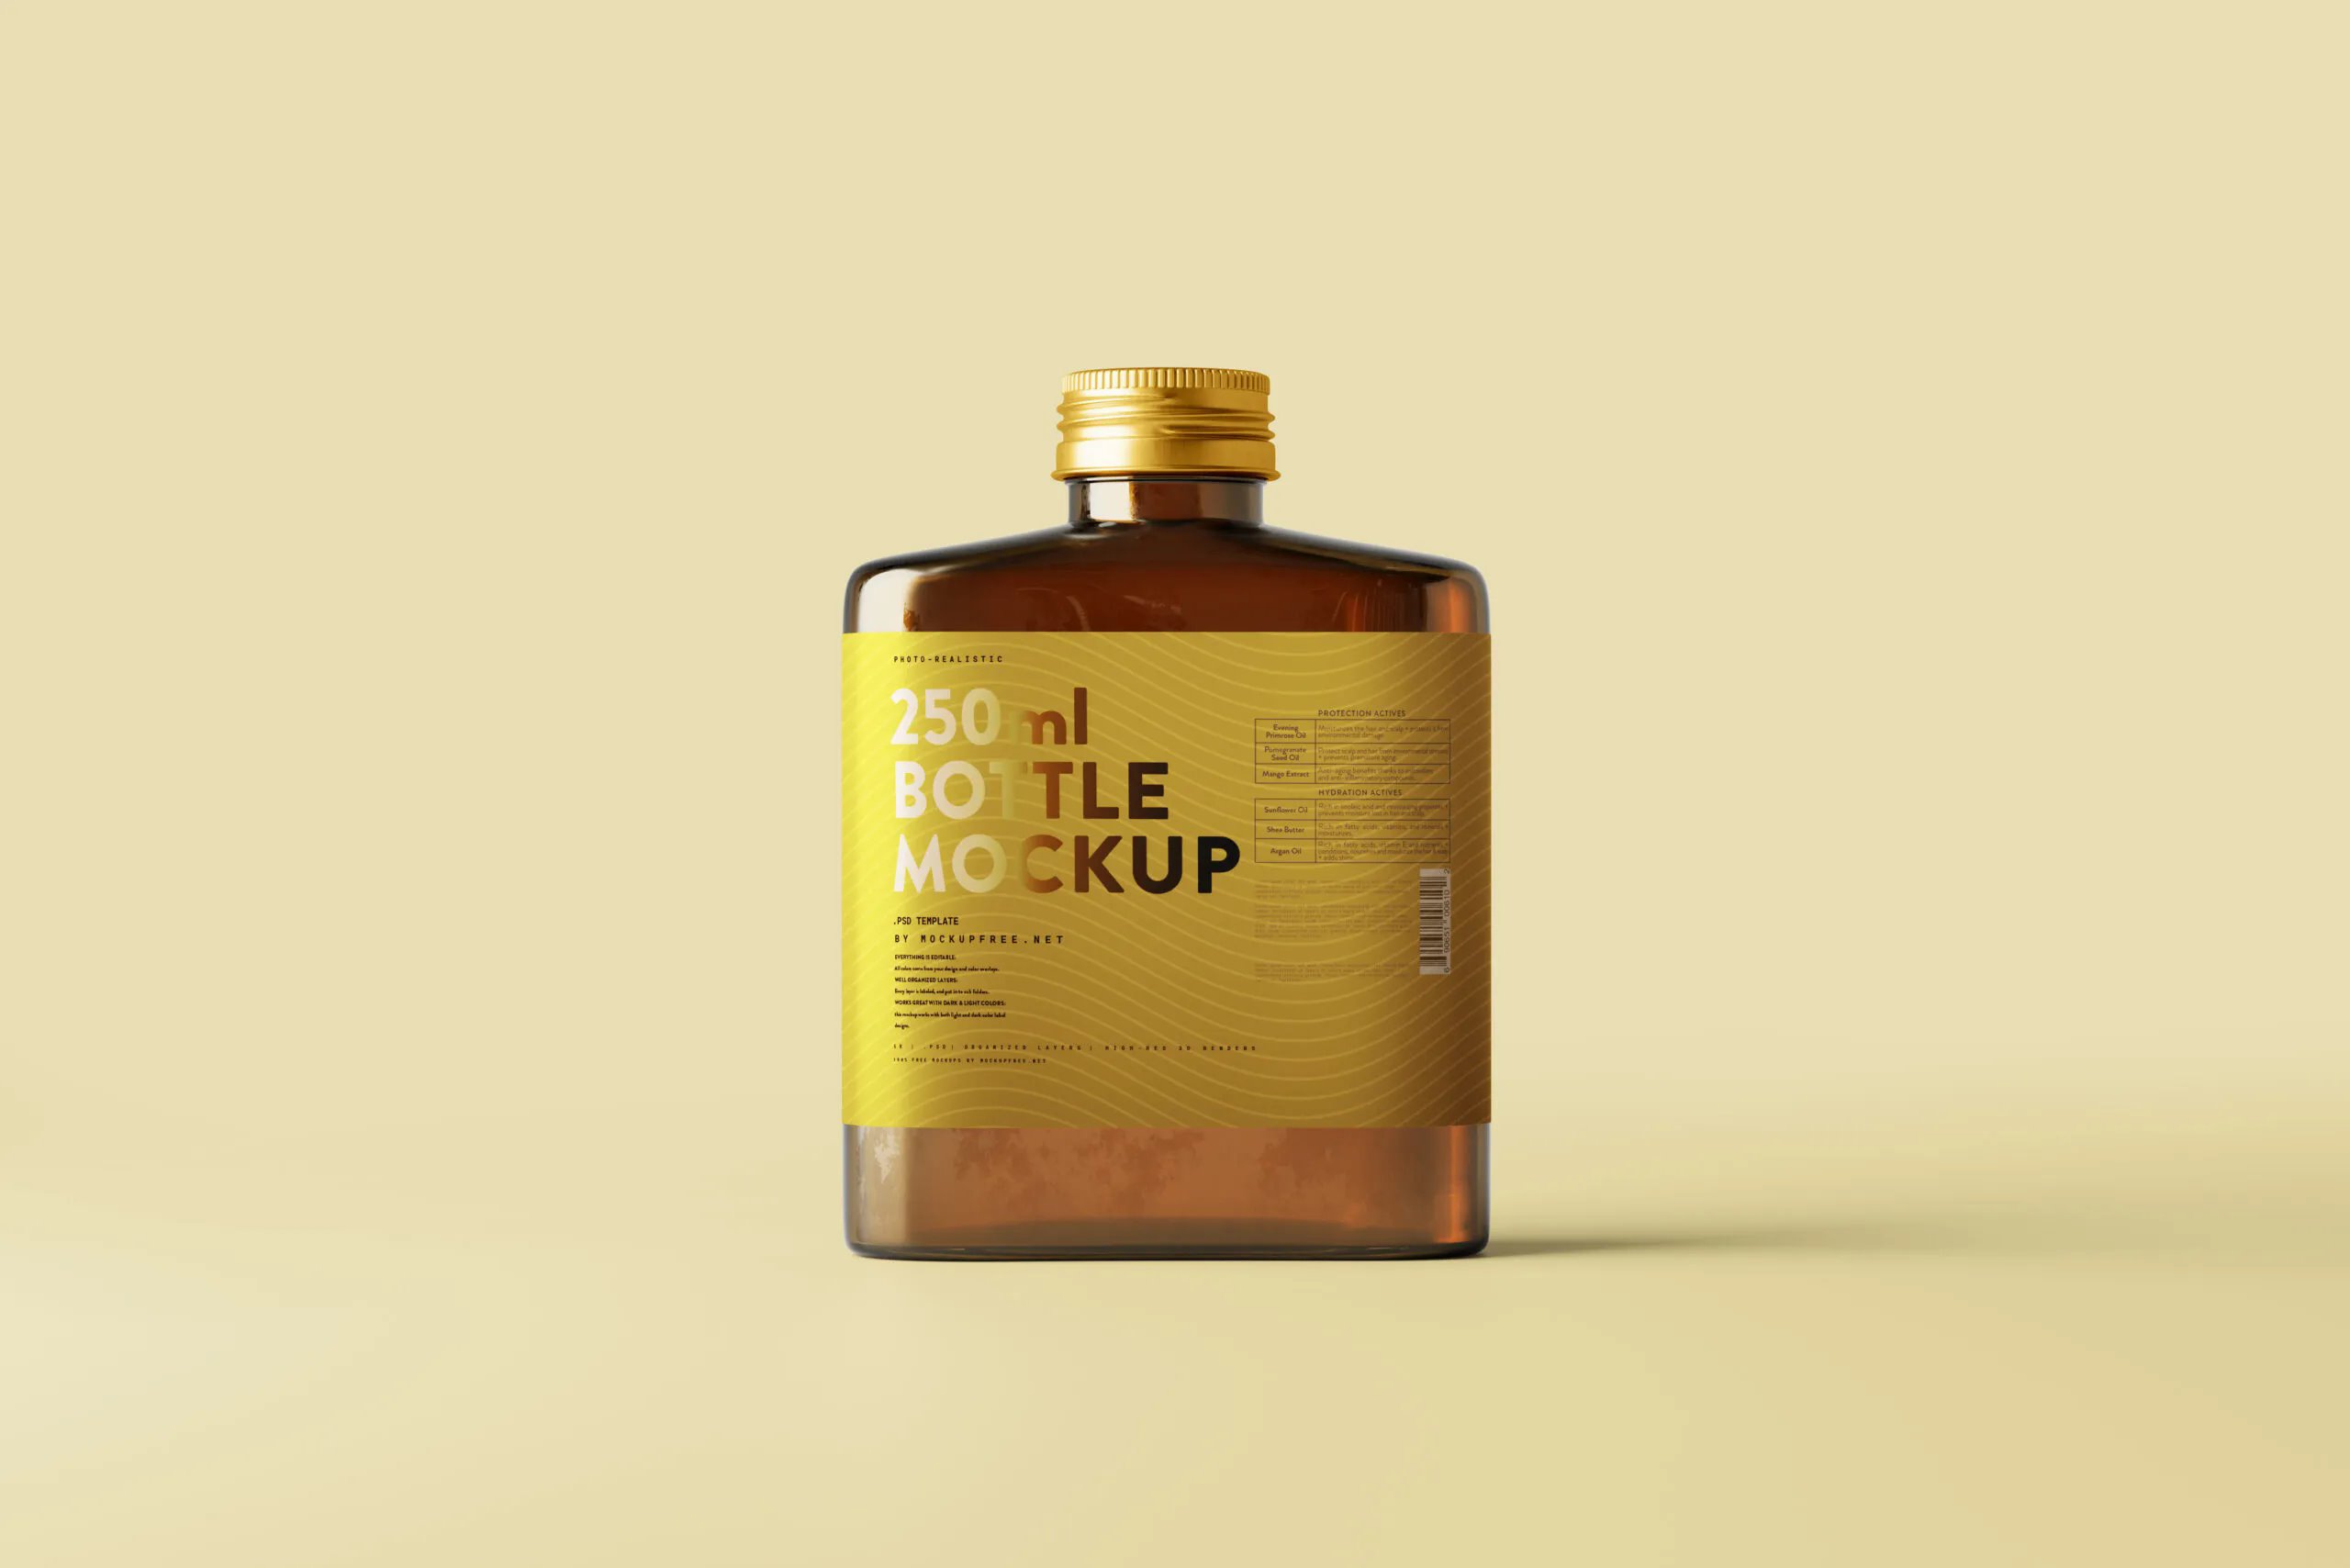 5 Flat Liquor Bottle Mockups with Screw Cap in Varied Sights FREE PSD